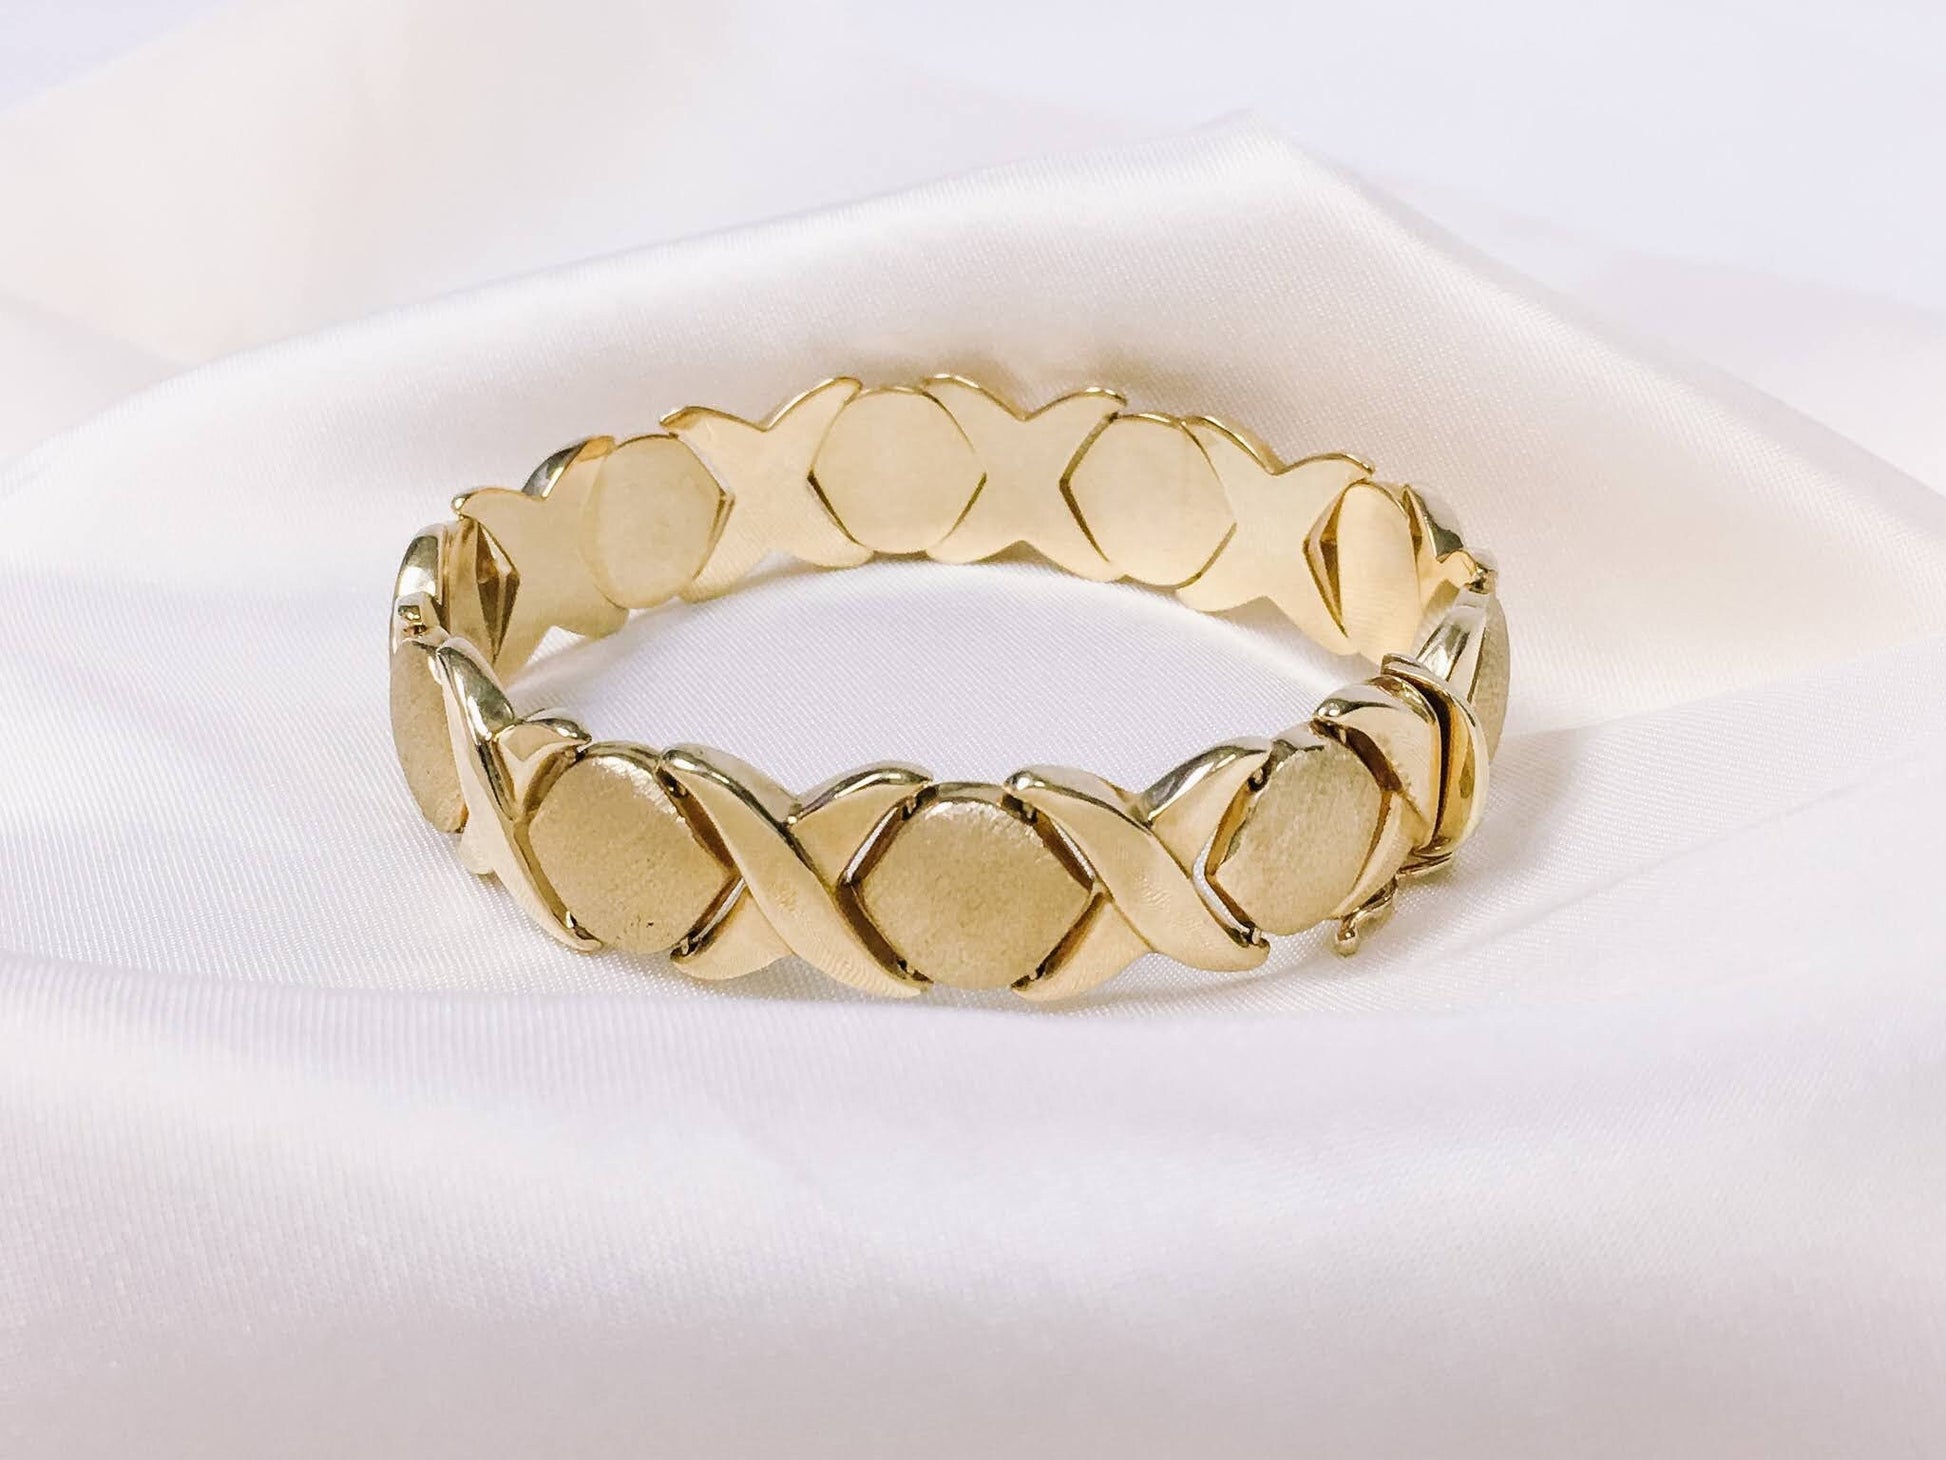 Vintage Italian 14k Yellow Gold X and O Polished and Matte Textured Bracelet, 15mm, 6in